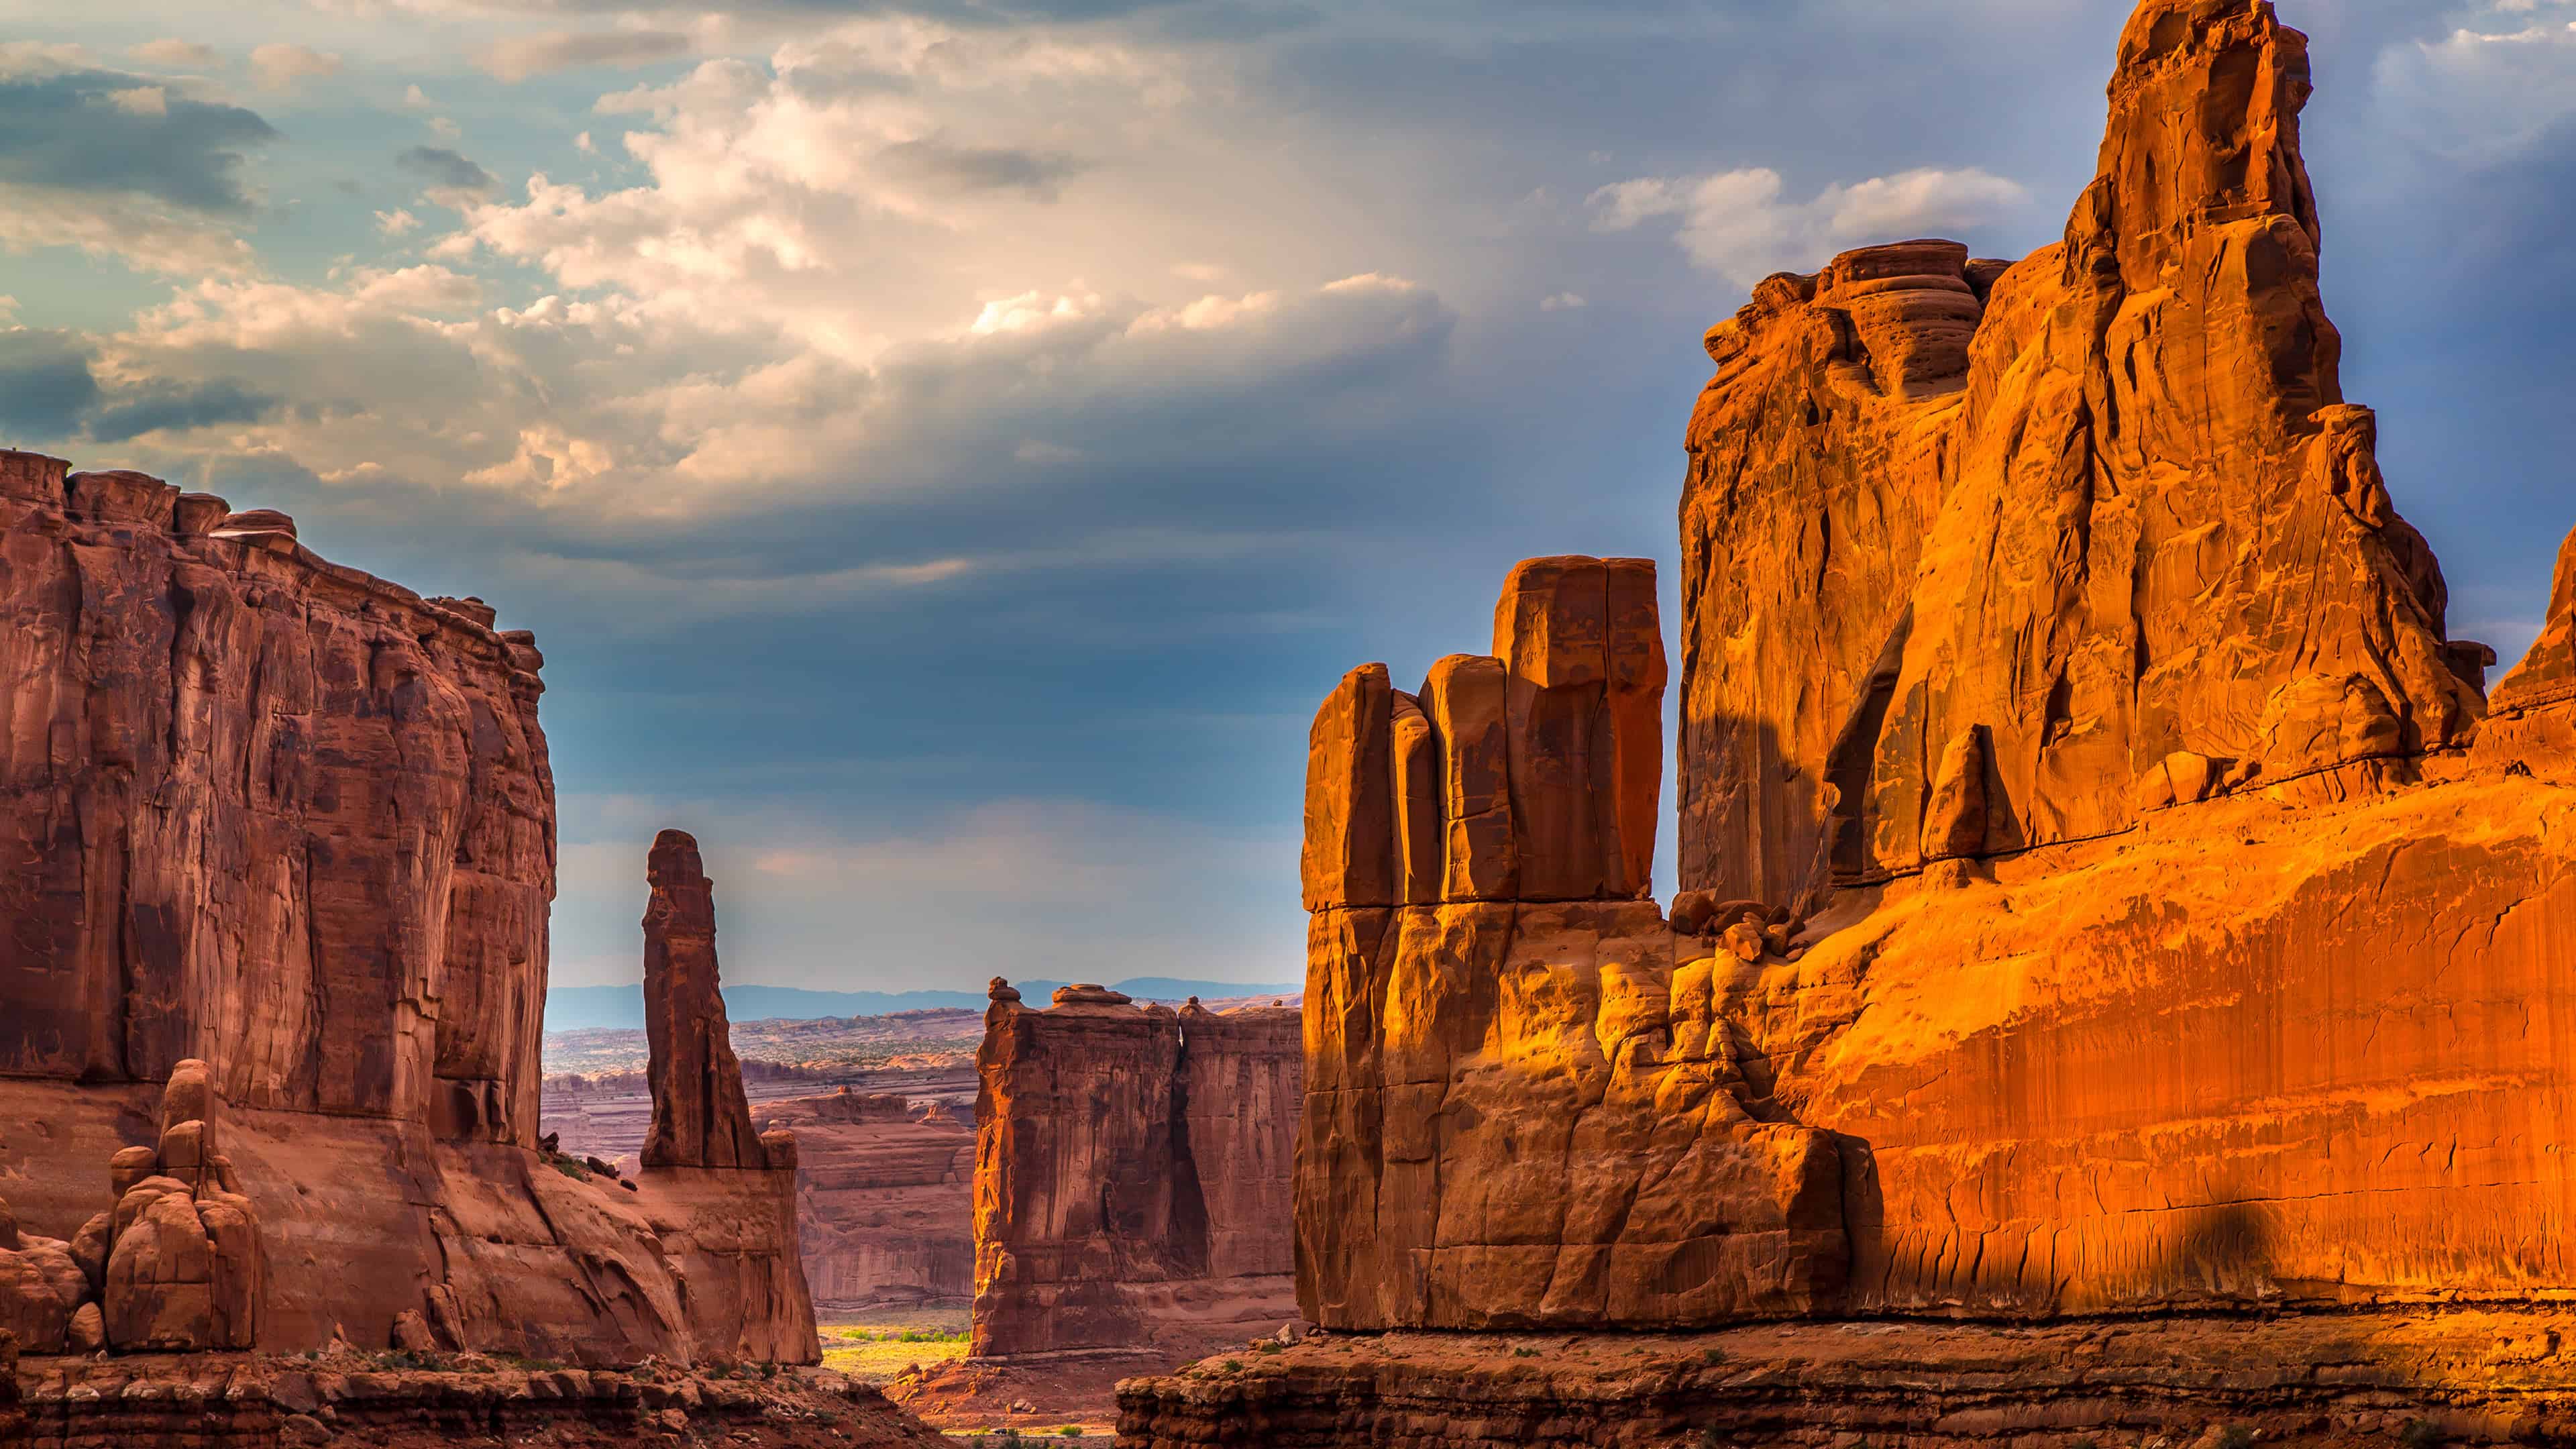 Courthouse Towers Arches National Park Utah United States